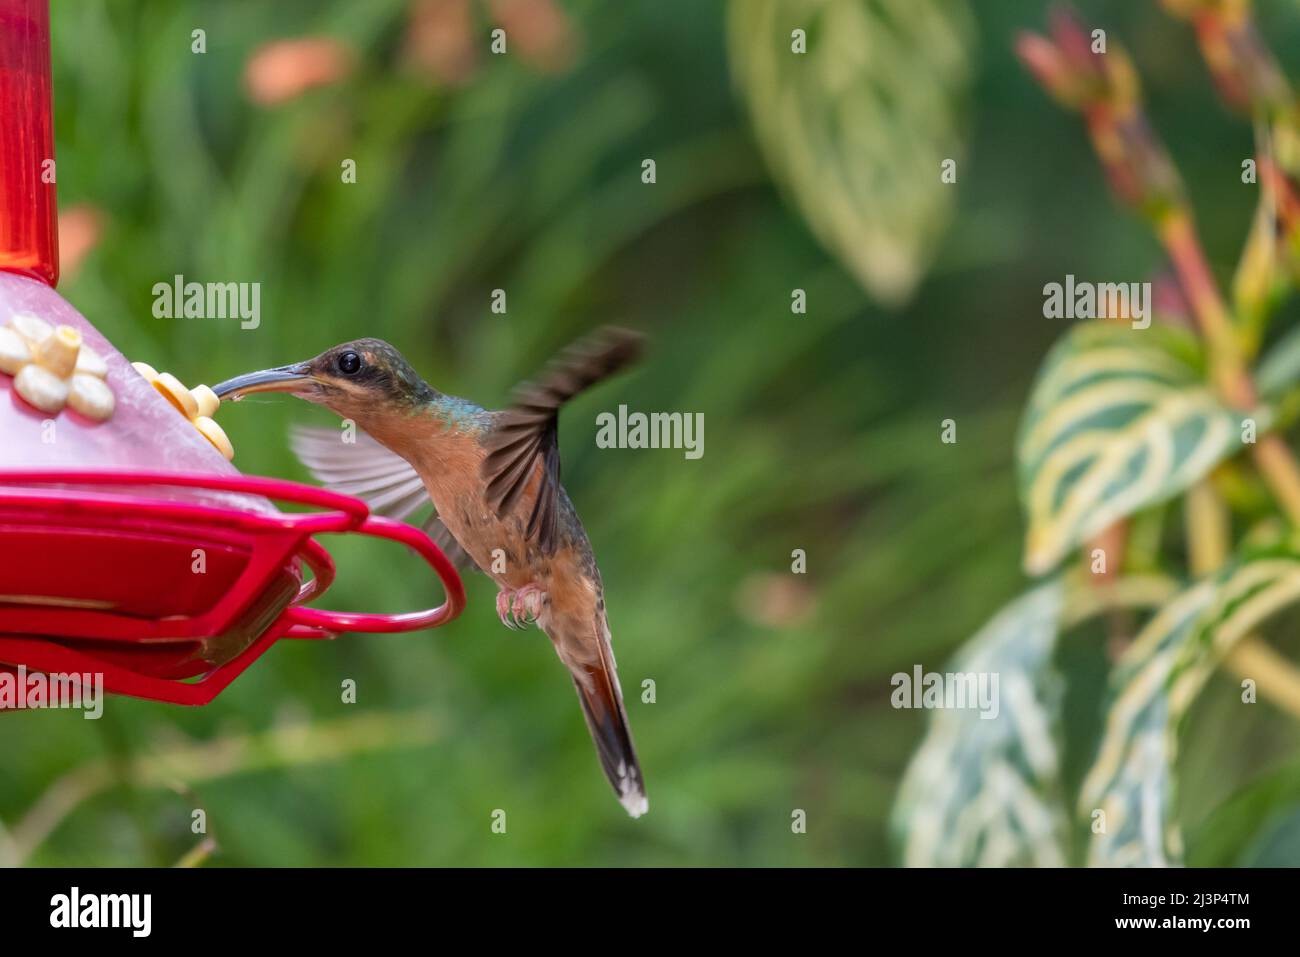 Rufous-breasted Hermit hummingbird, Glaucis hirsutus, feeding on a bird feeder decoration in a tropical garden surrounded by lush foliage. Stock Photo